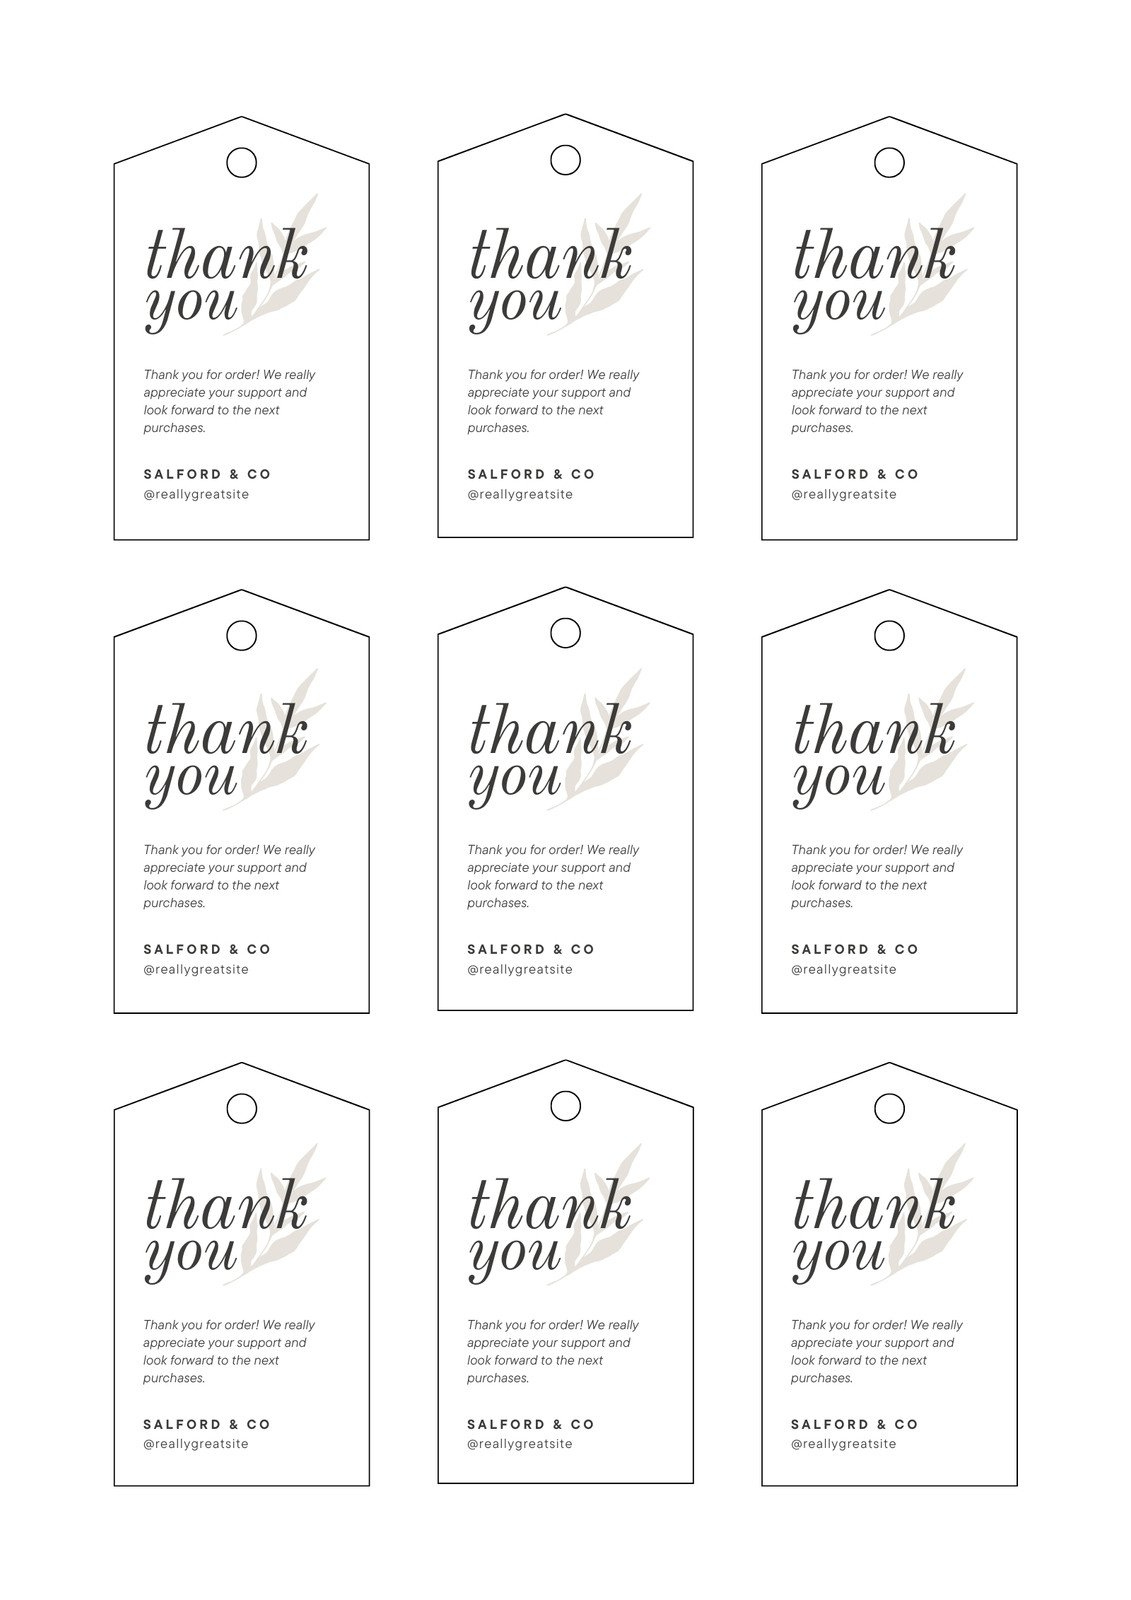 Free, Printable And Customizable Gift Tag Templates | Canva inside Free Online Gift Tags Printable